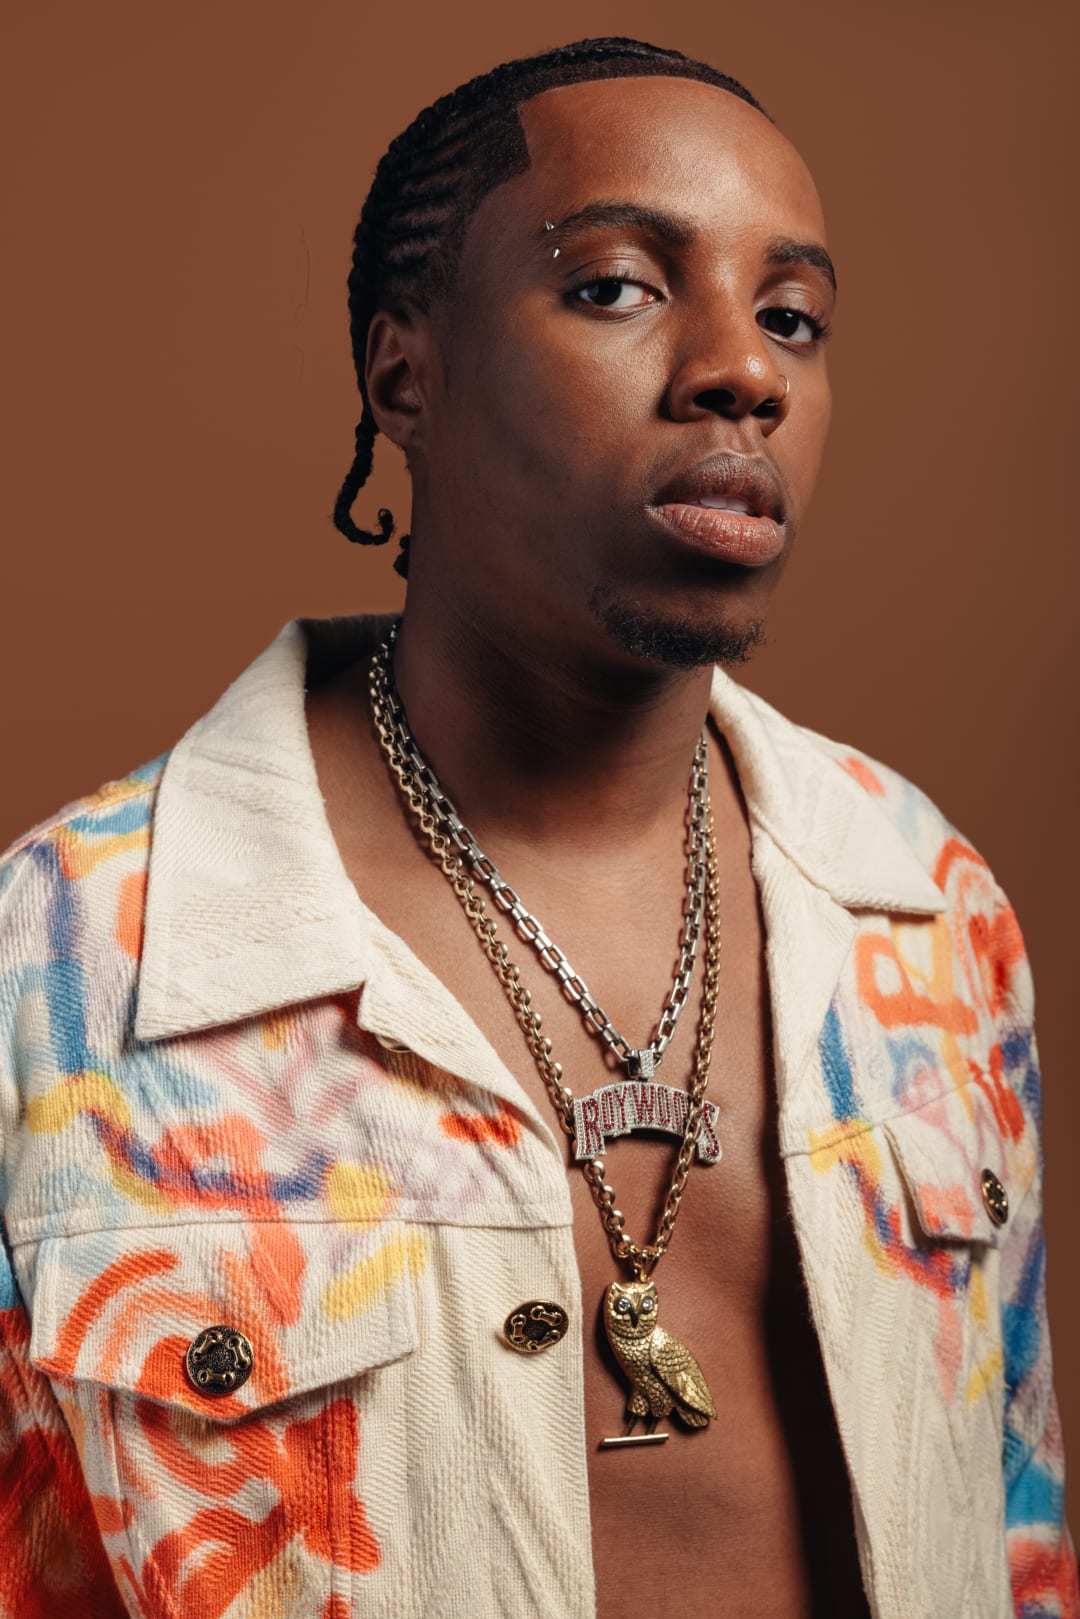 Rapper Roy Woods wearing a white jacket with a graffiti pattern